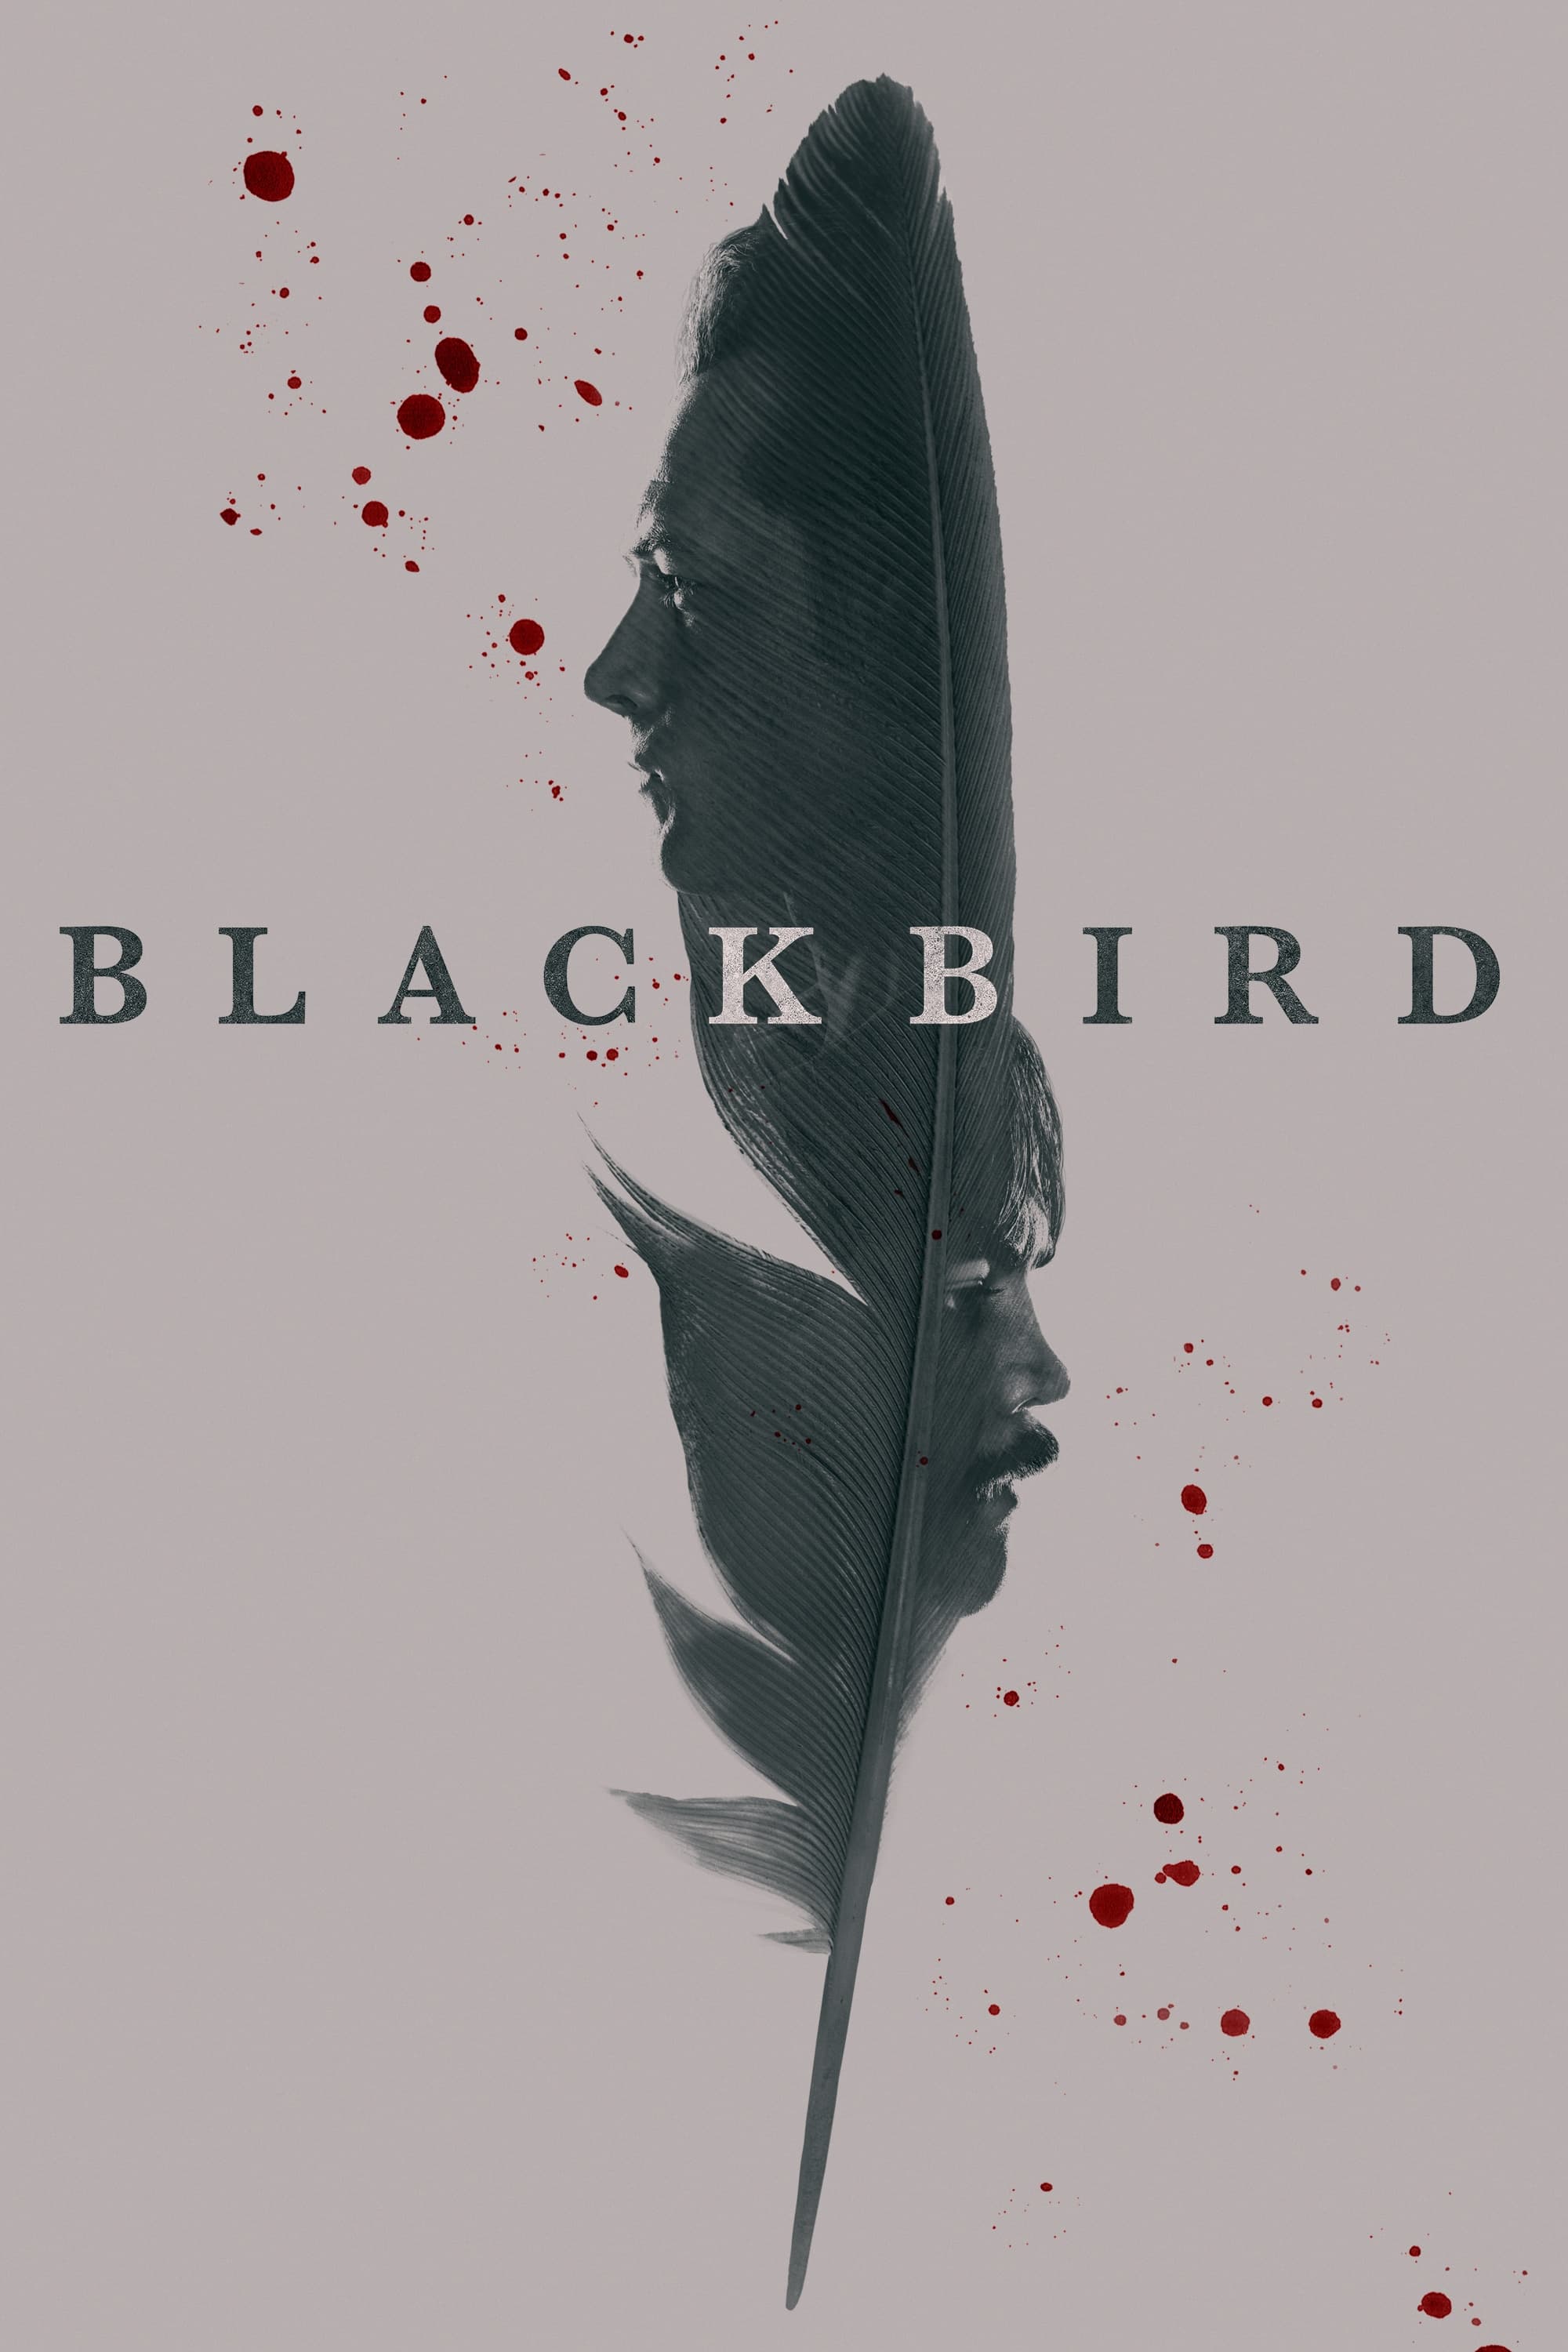 Black Bird TV Shows About Based On Novel Or Book